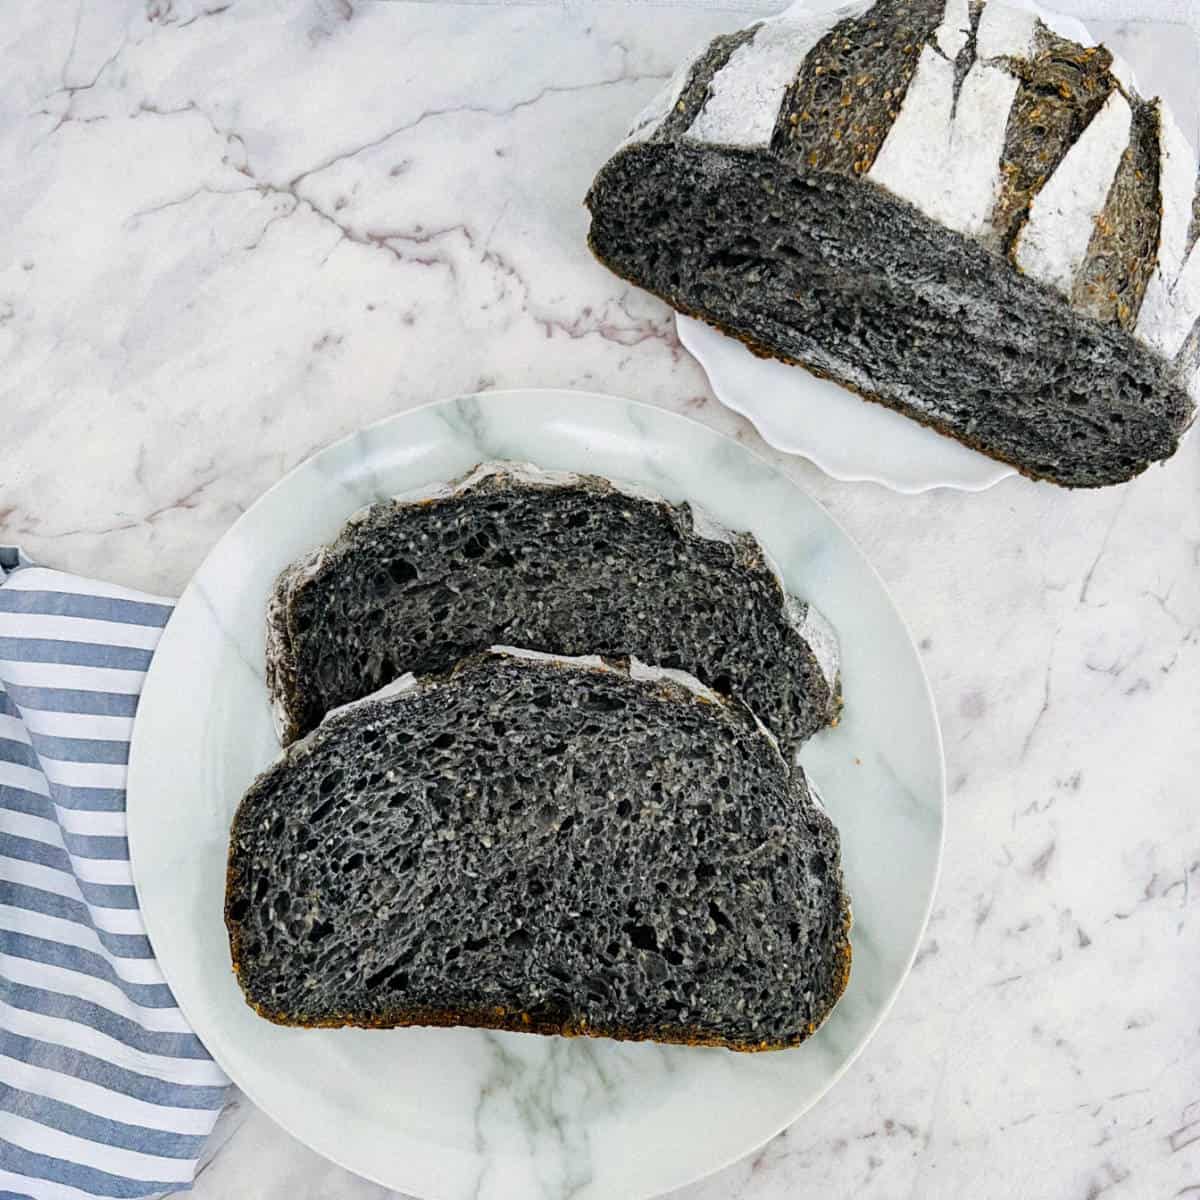 Sliced sourdough charcoal bread placed on a plate.